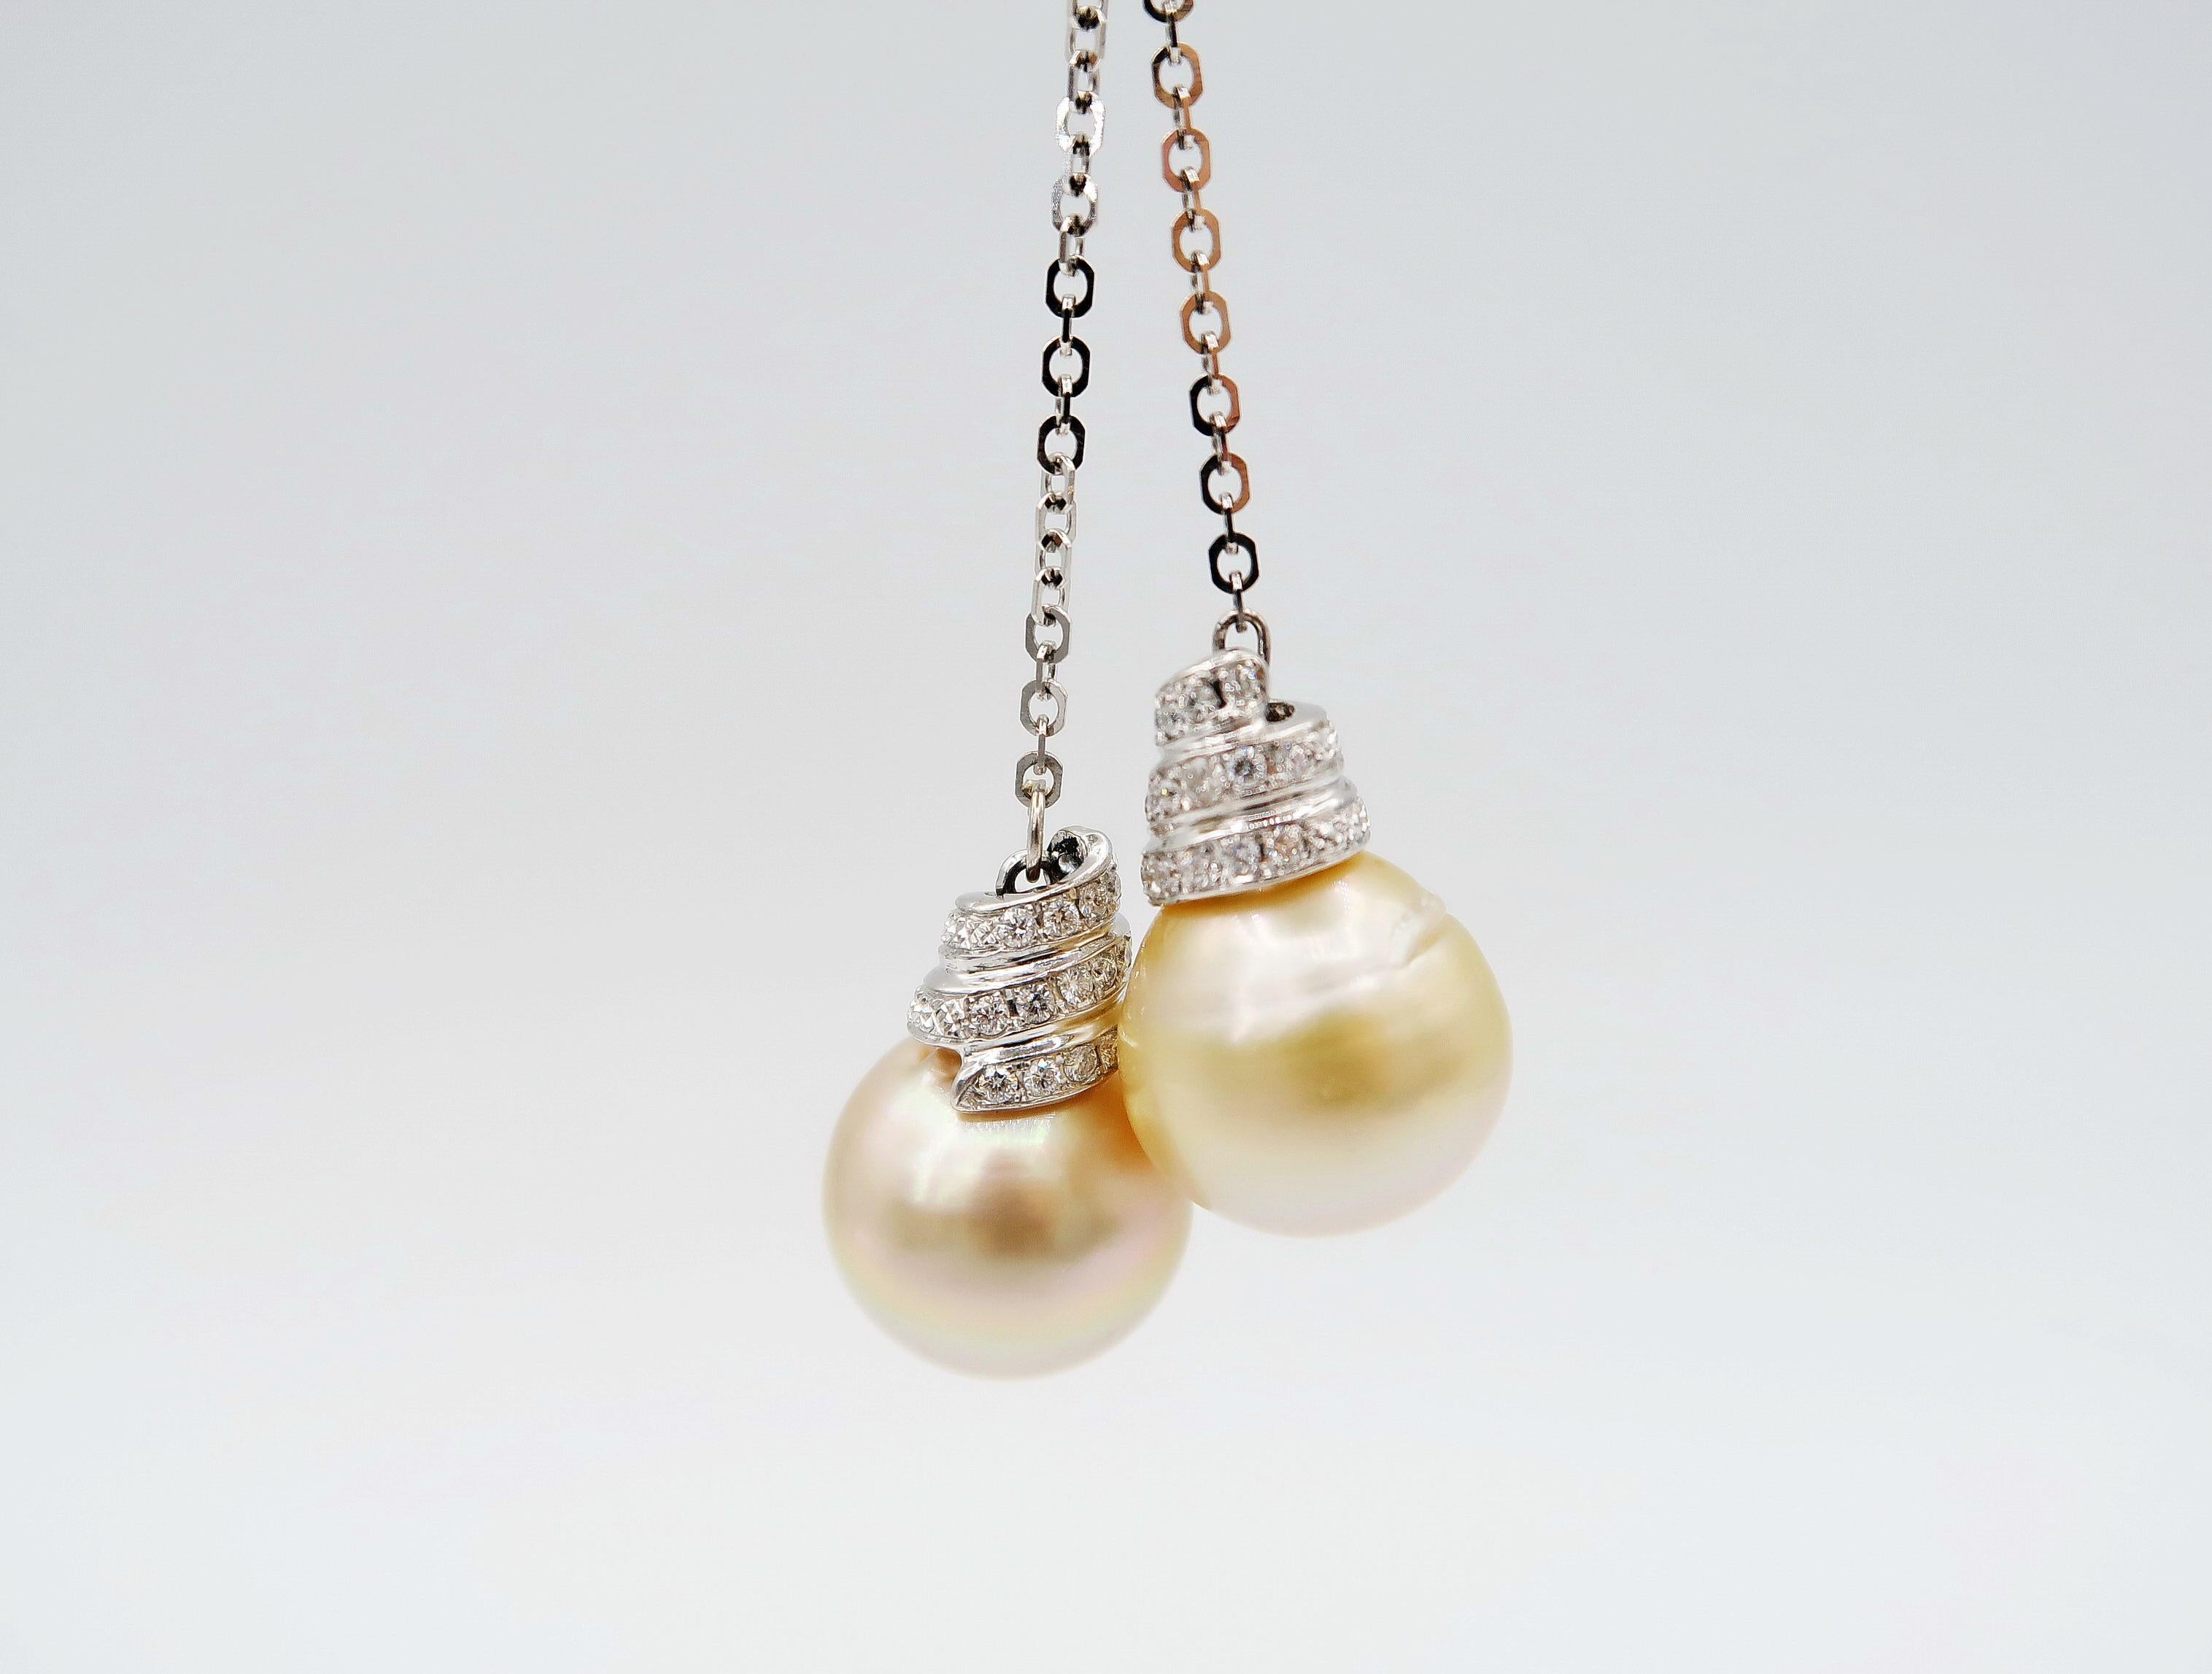 Brilliant Cut Double Golden South Sea Pearl Drop Necklace in 18k White Gold with Diamonds For Sale